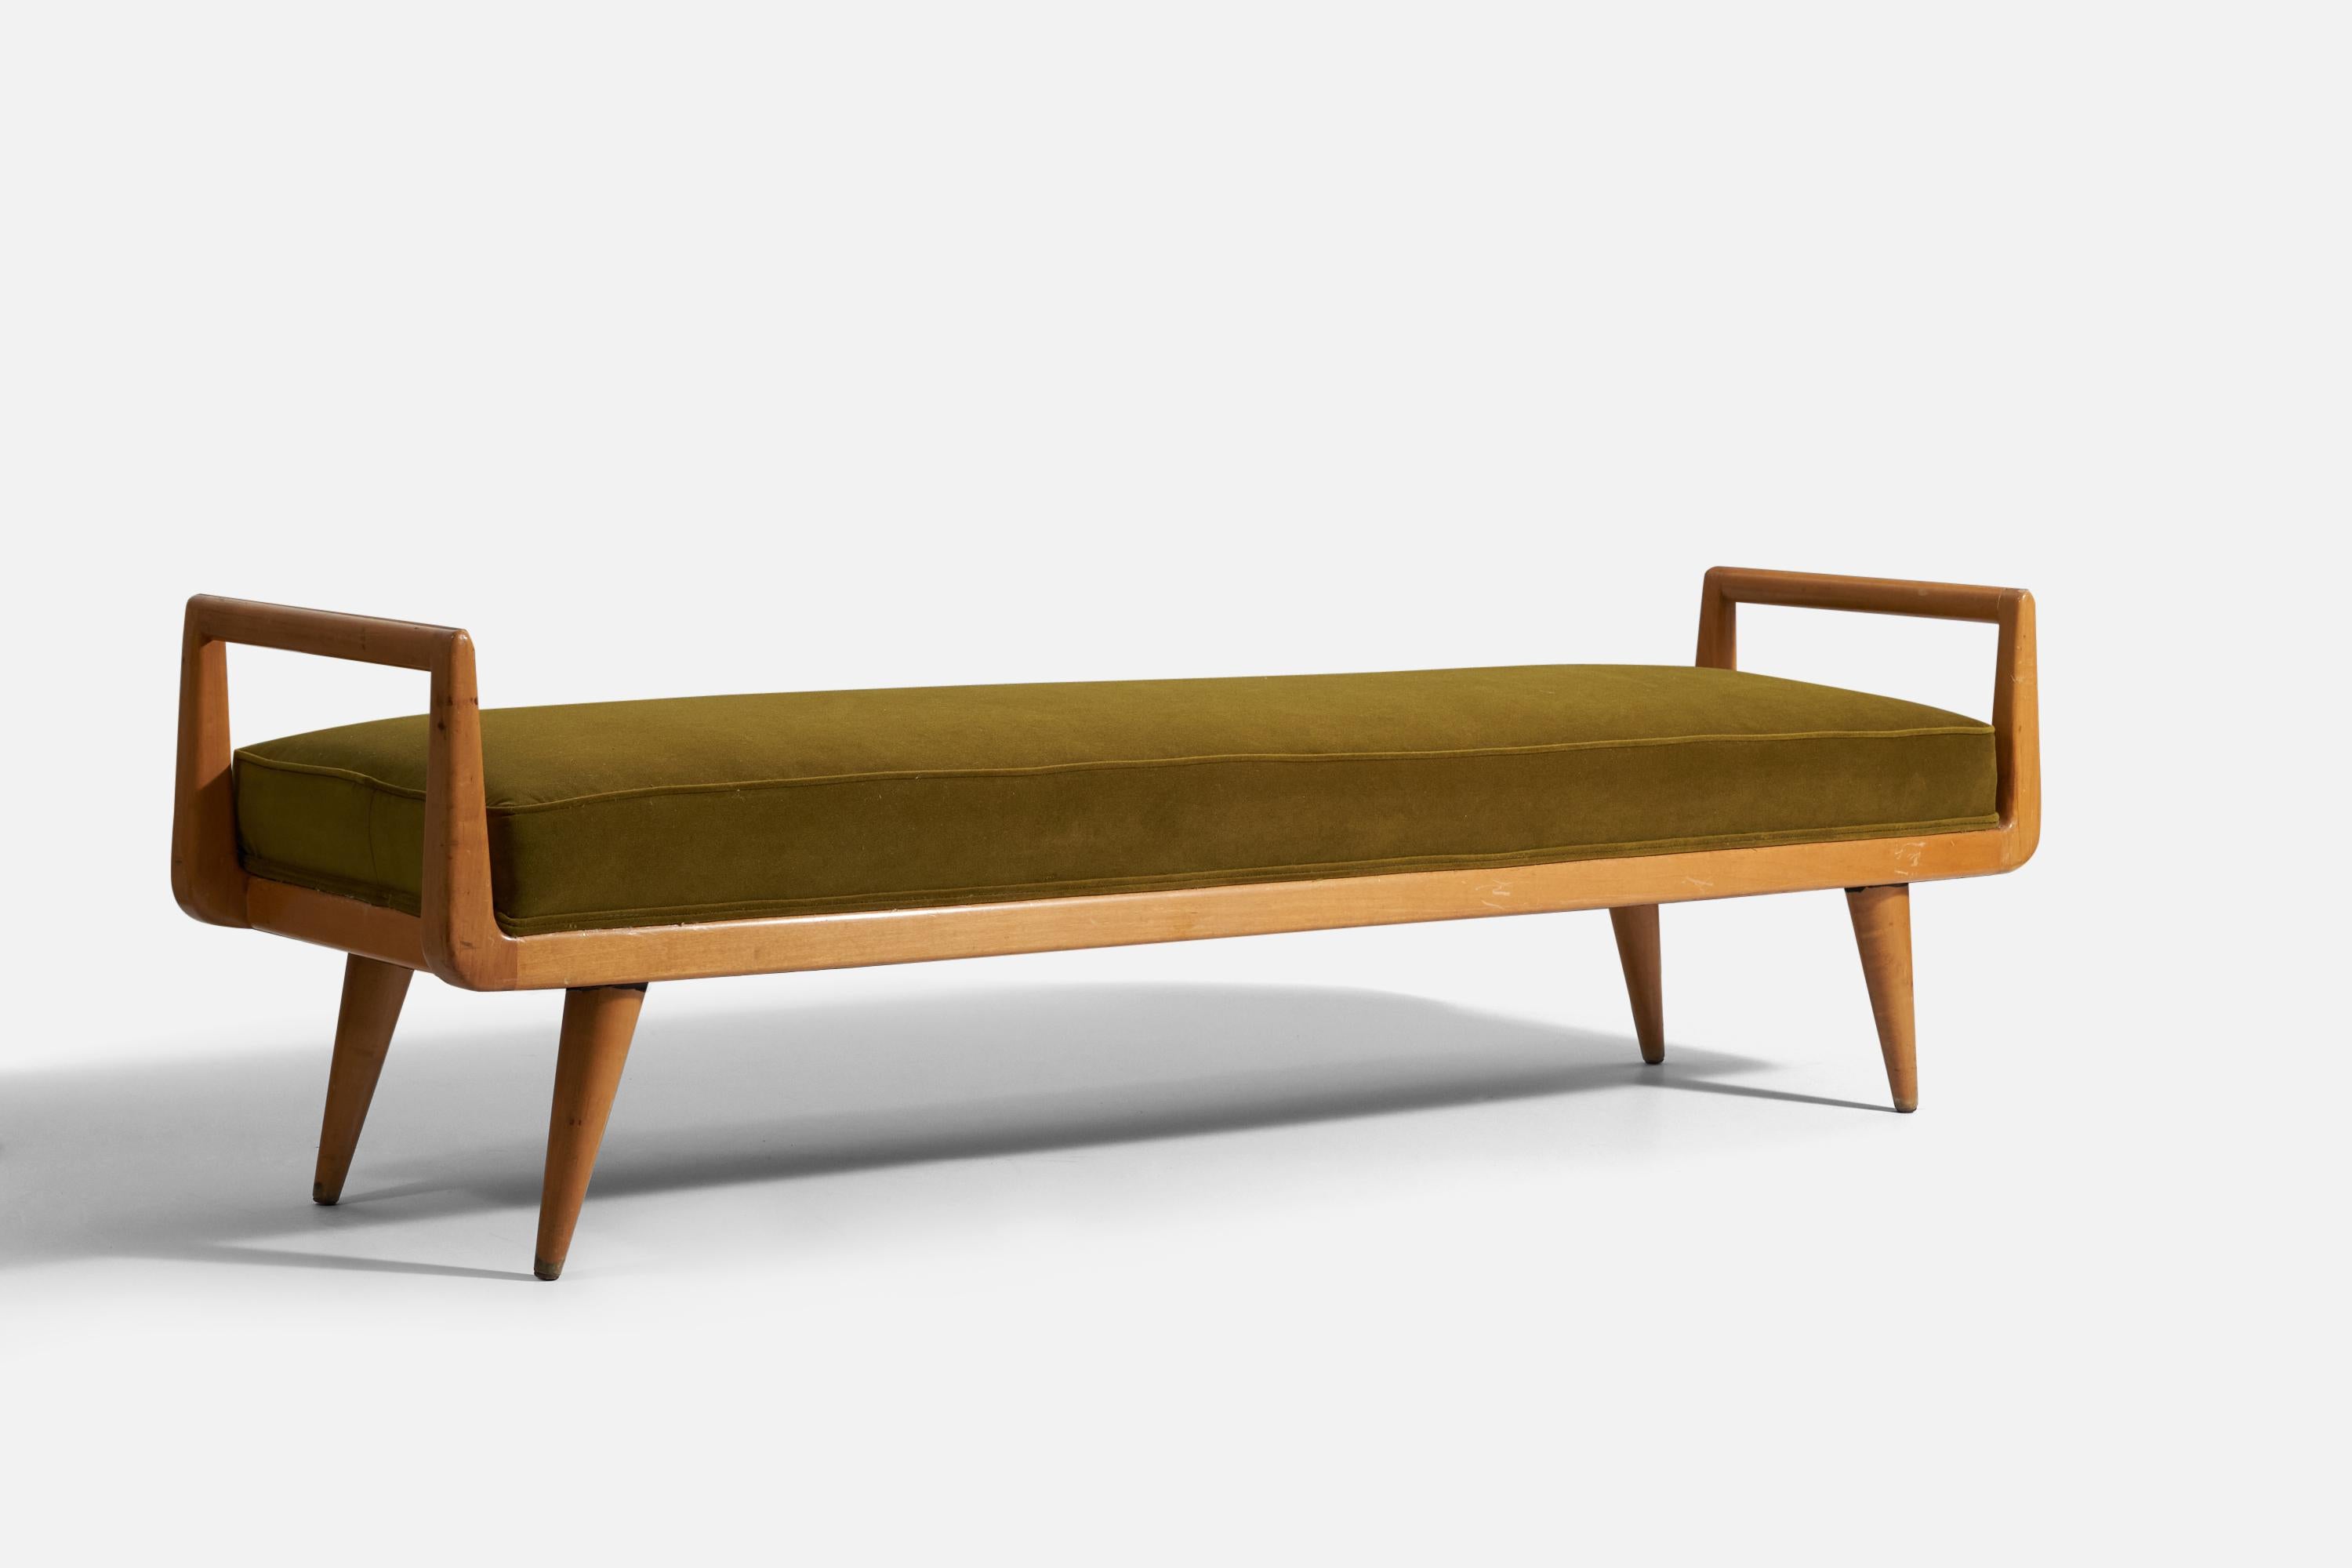 A bench designed by Paul Frankl for Johnson Furniture Company, Grand Rapids, Michigan, United States, 1950s. In solid wood and newly reupholstered in green velvet fabric.

